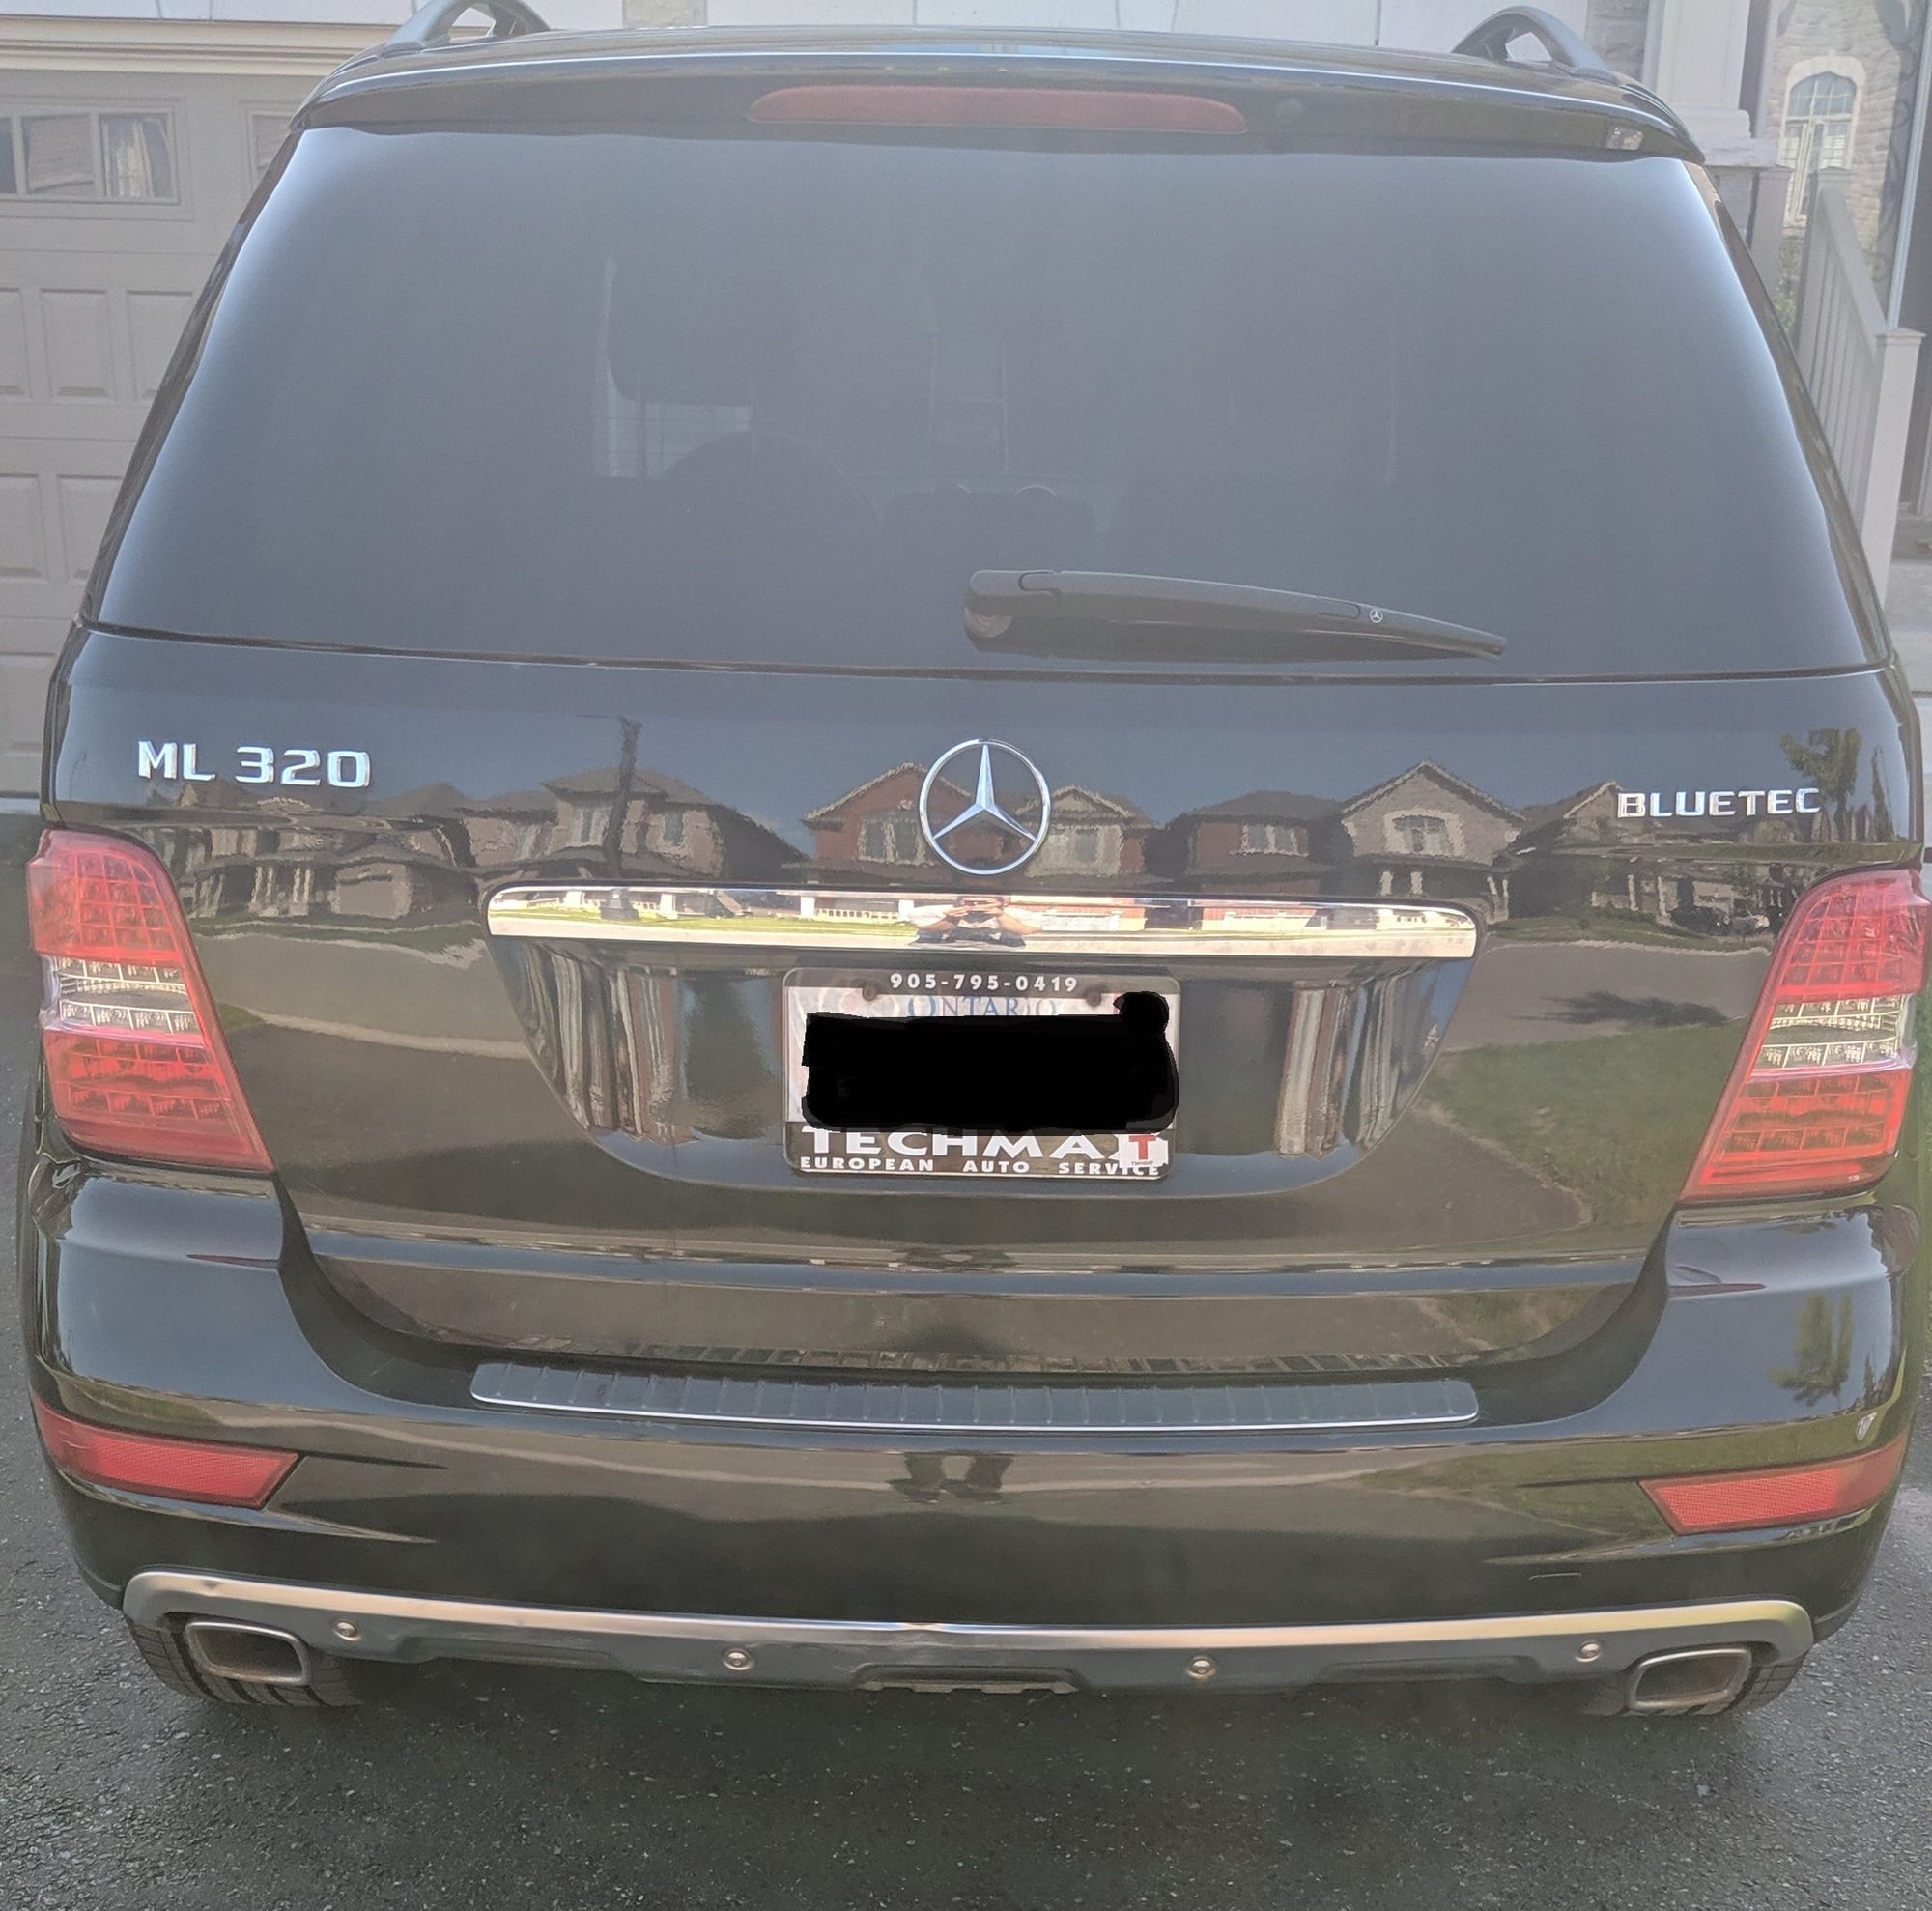 2009 Mercedes-Benz ML320 - 2009 Mercedes Benz ML320! Bluetec! Low KMS, MINT Condition! - Used - VIN 4JGBB25E99A501894 - 174,000 Miles - 6 cyl - AWD - Automatic - SUV - Black - Toronto, ON M1S3E6, Canada